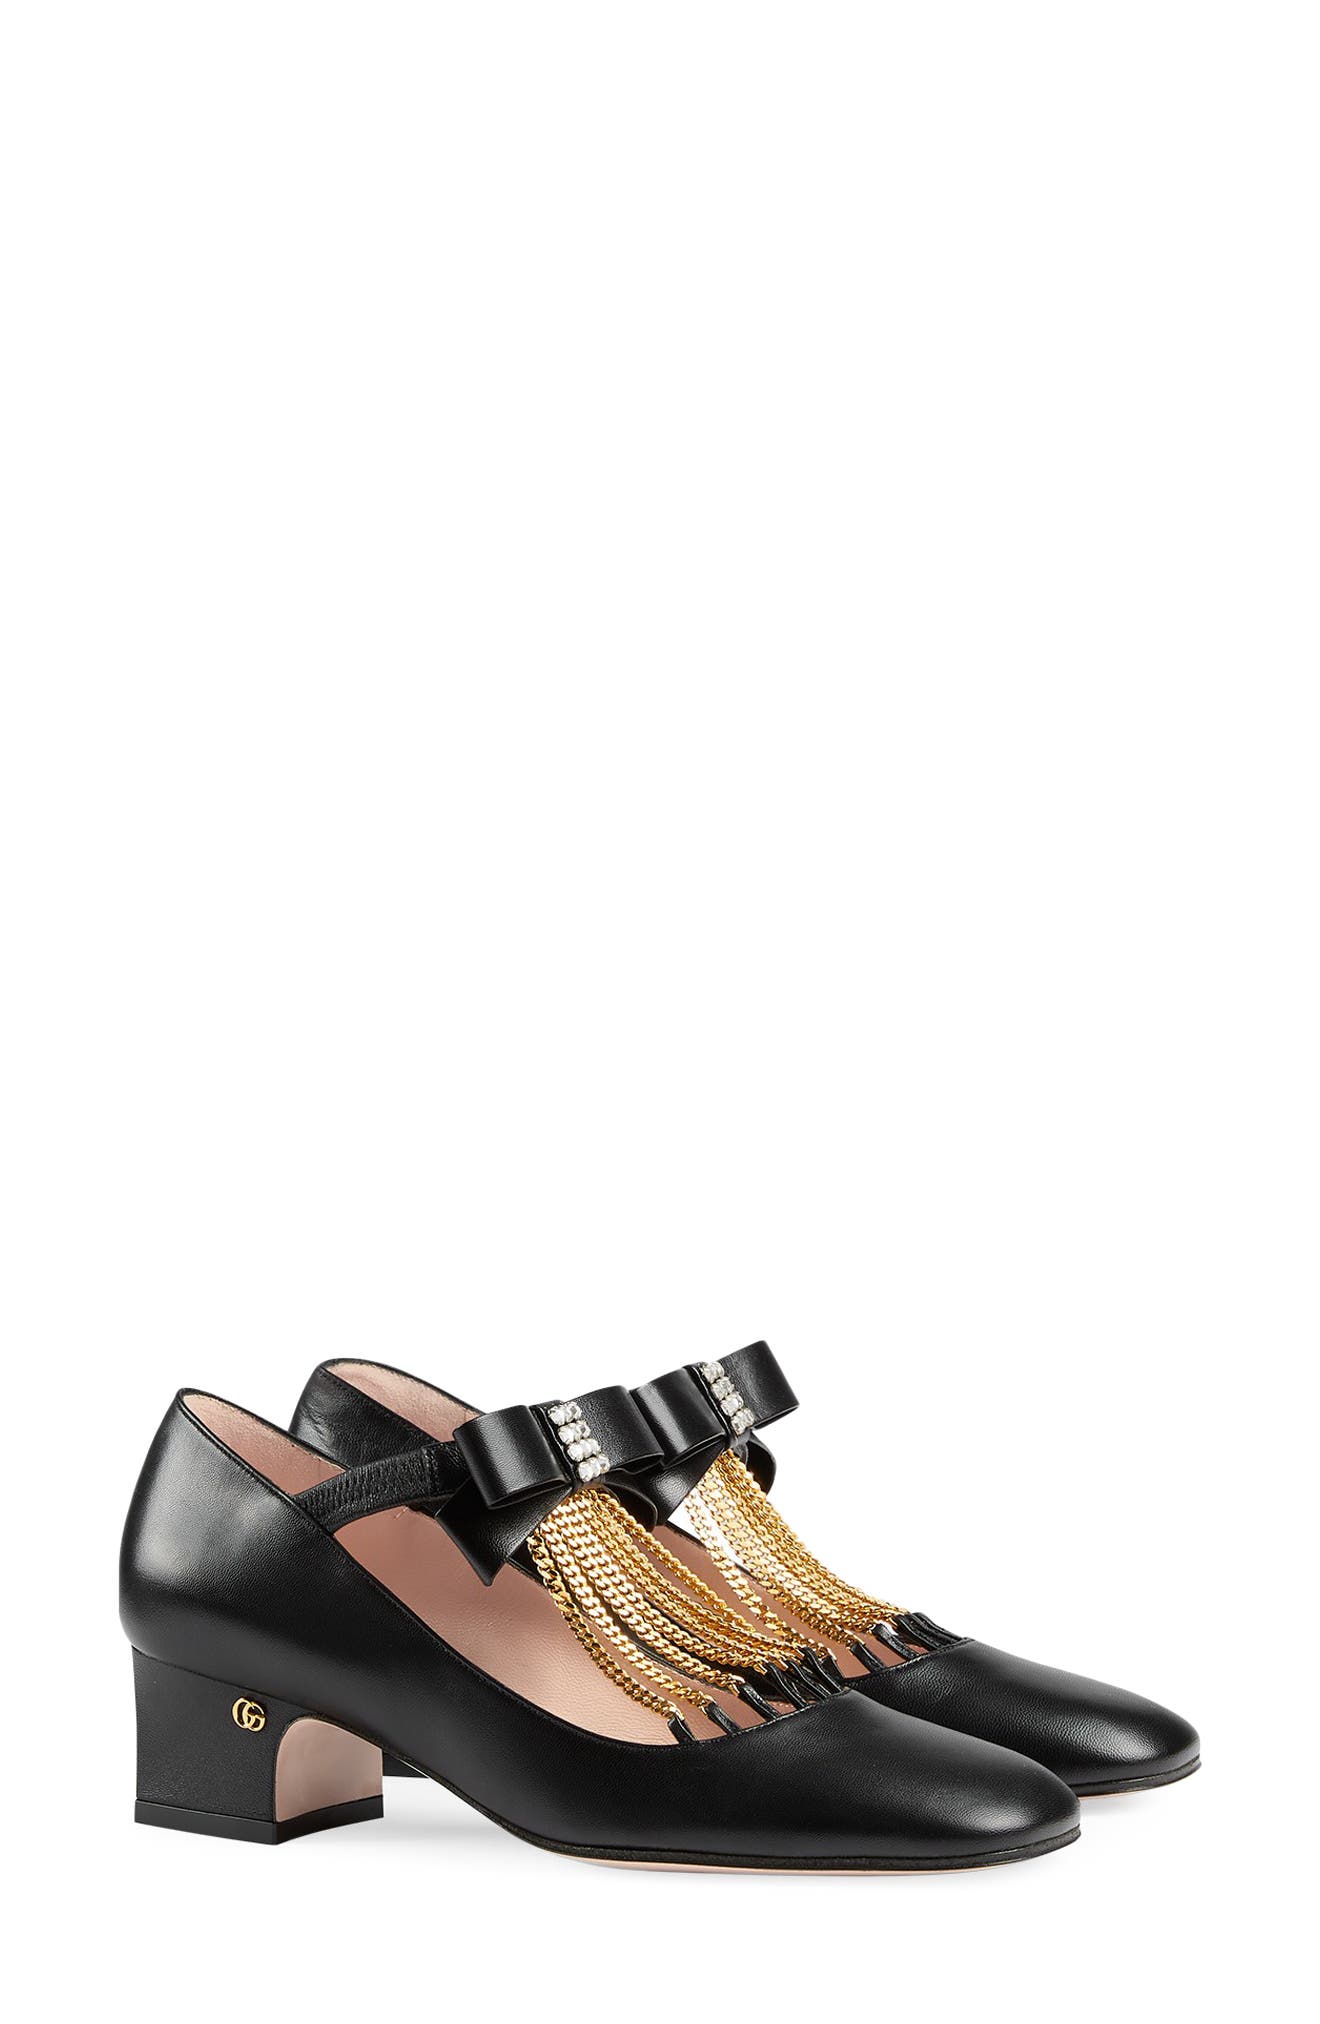 mary jane shoes nordstrom